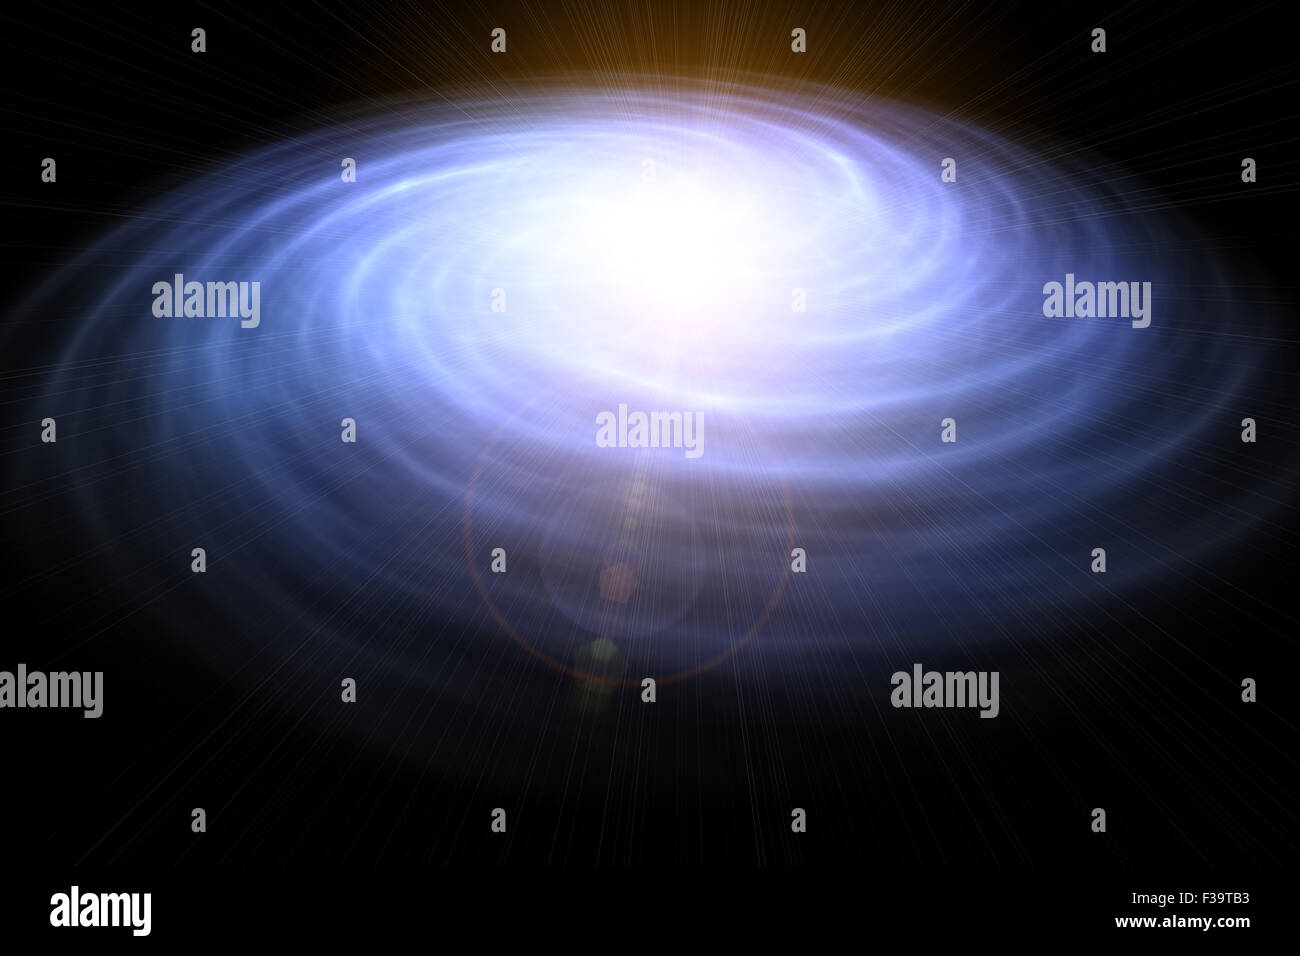 Illustration of a spiral galaxy in deep space Stock Photo